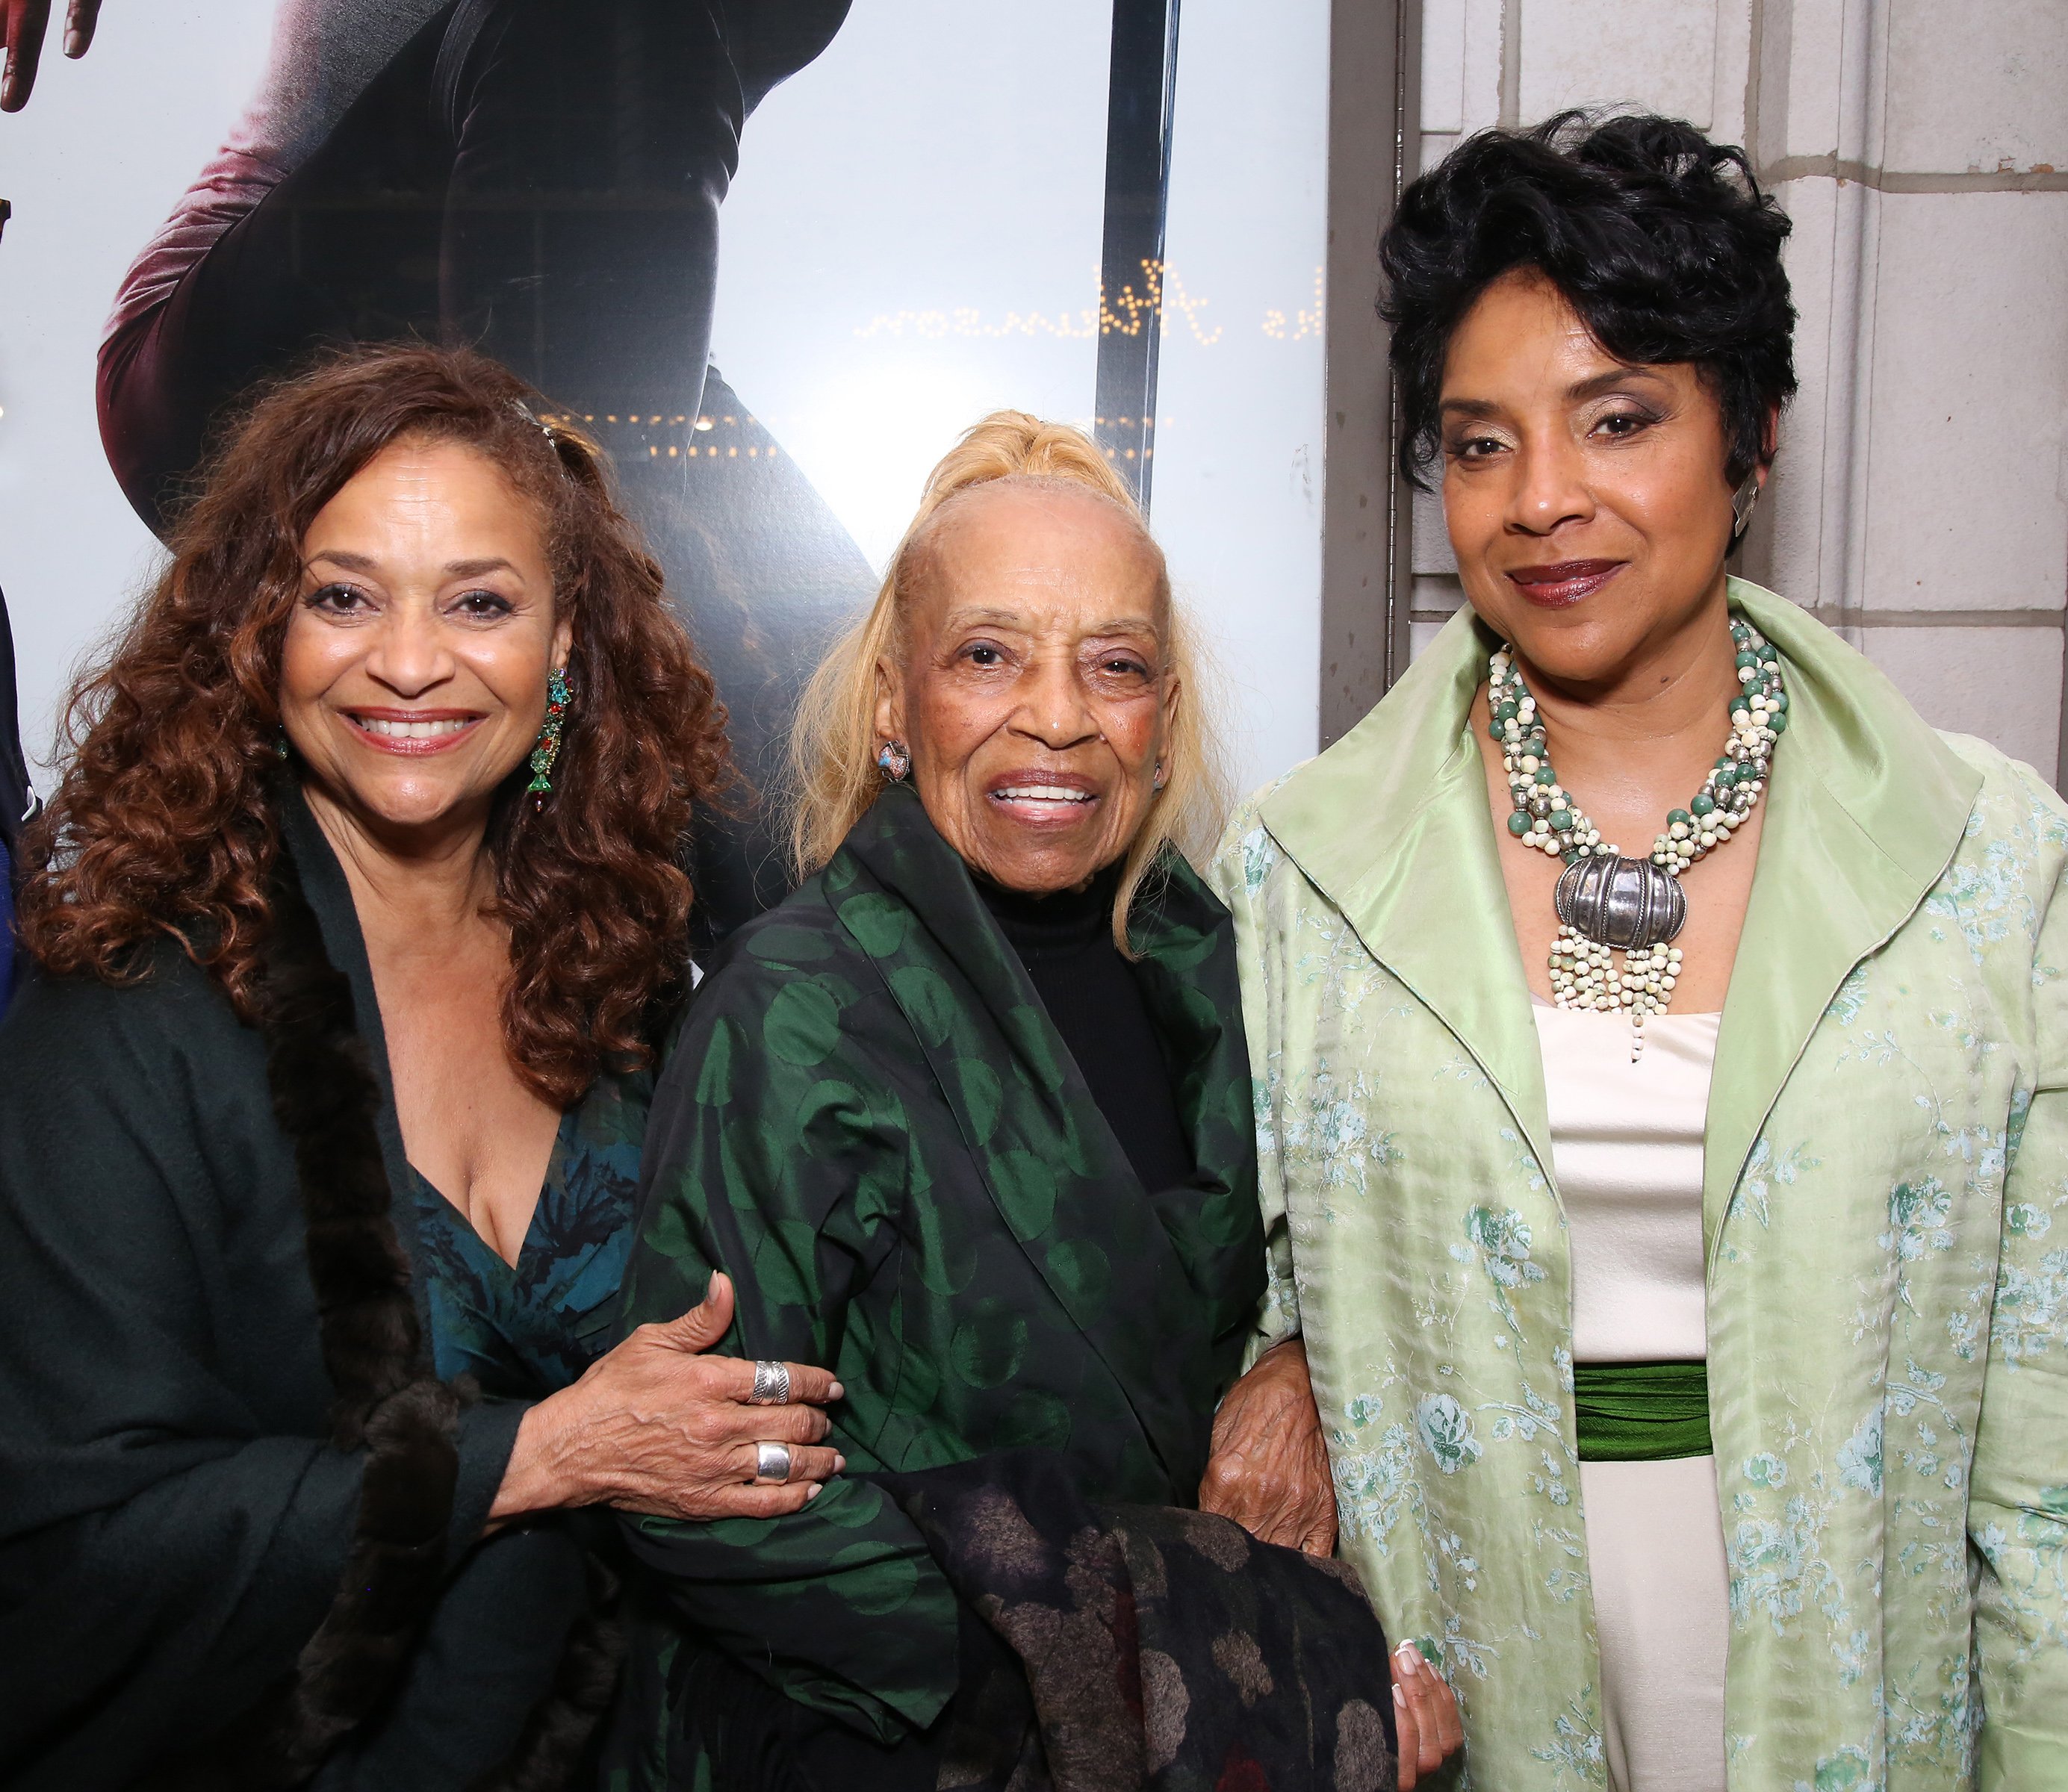 Debbie Allen, Vivian Ayers, & Phylicia Rashad at the Broadway opening night of "Saint Joan" in April 2018. | Photo: Getty Images